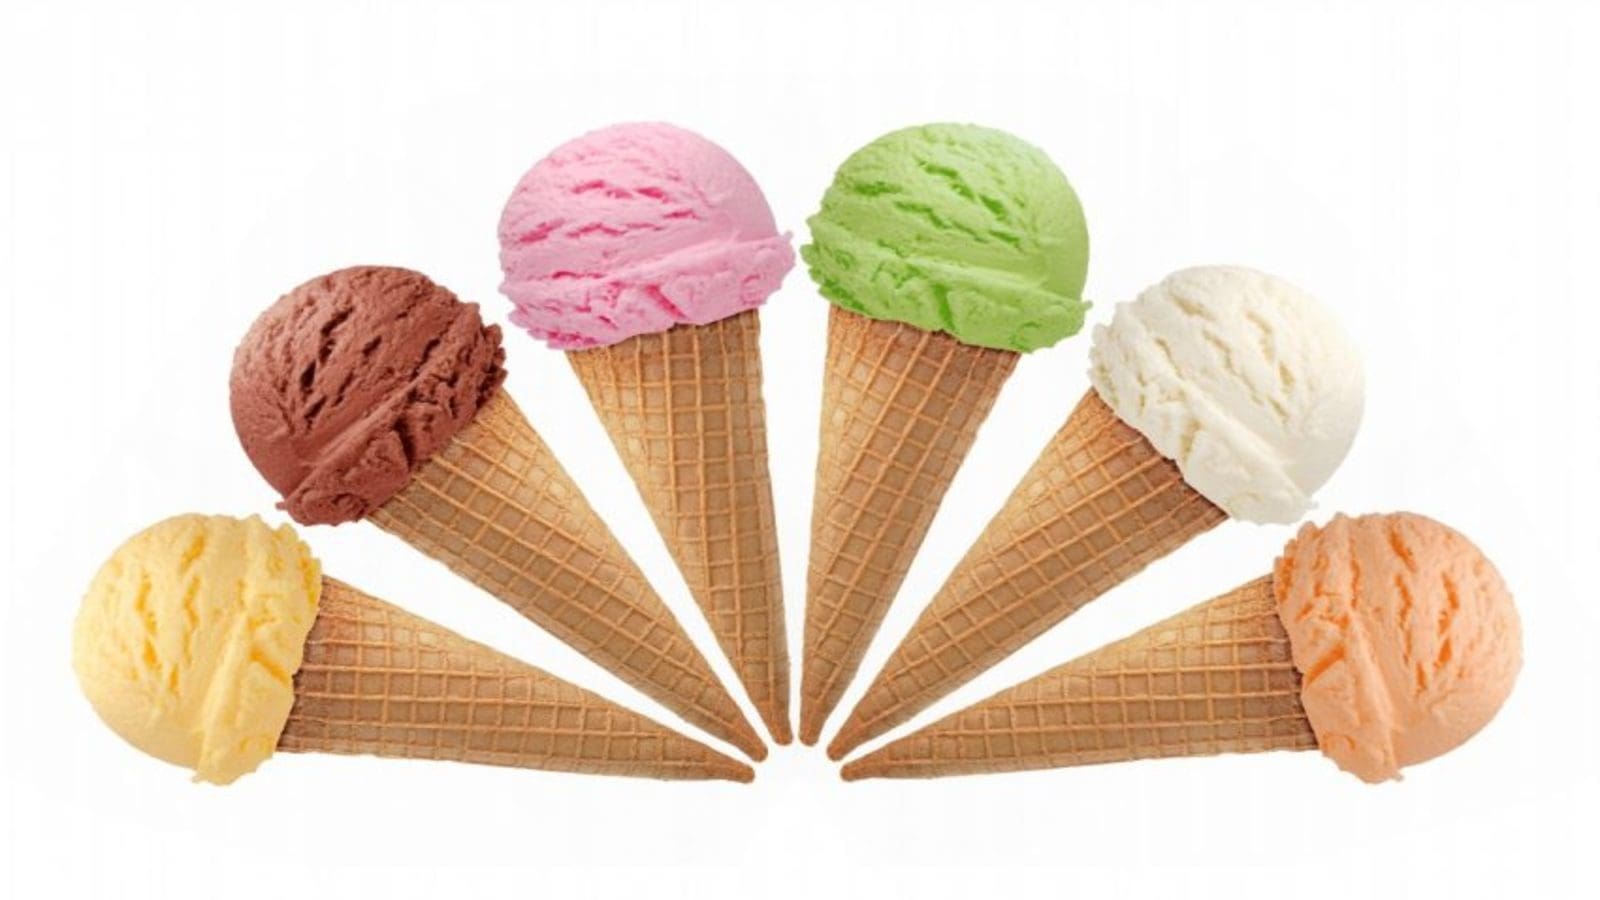 NFRA reports on Ice-cream consumption trends